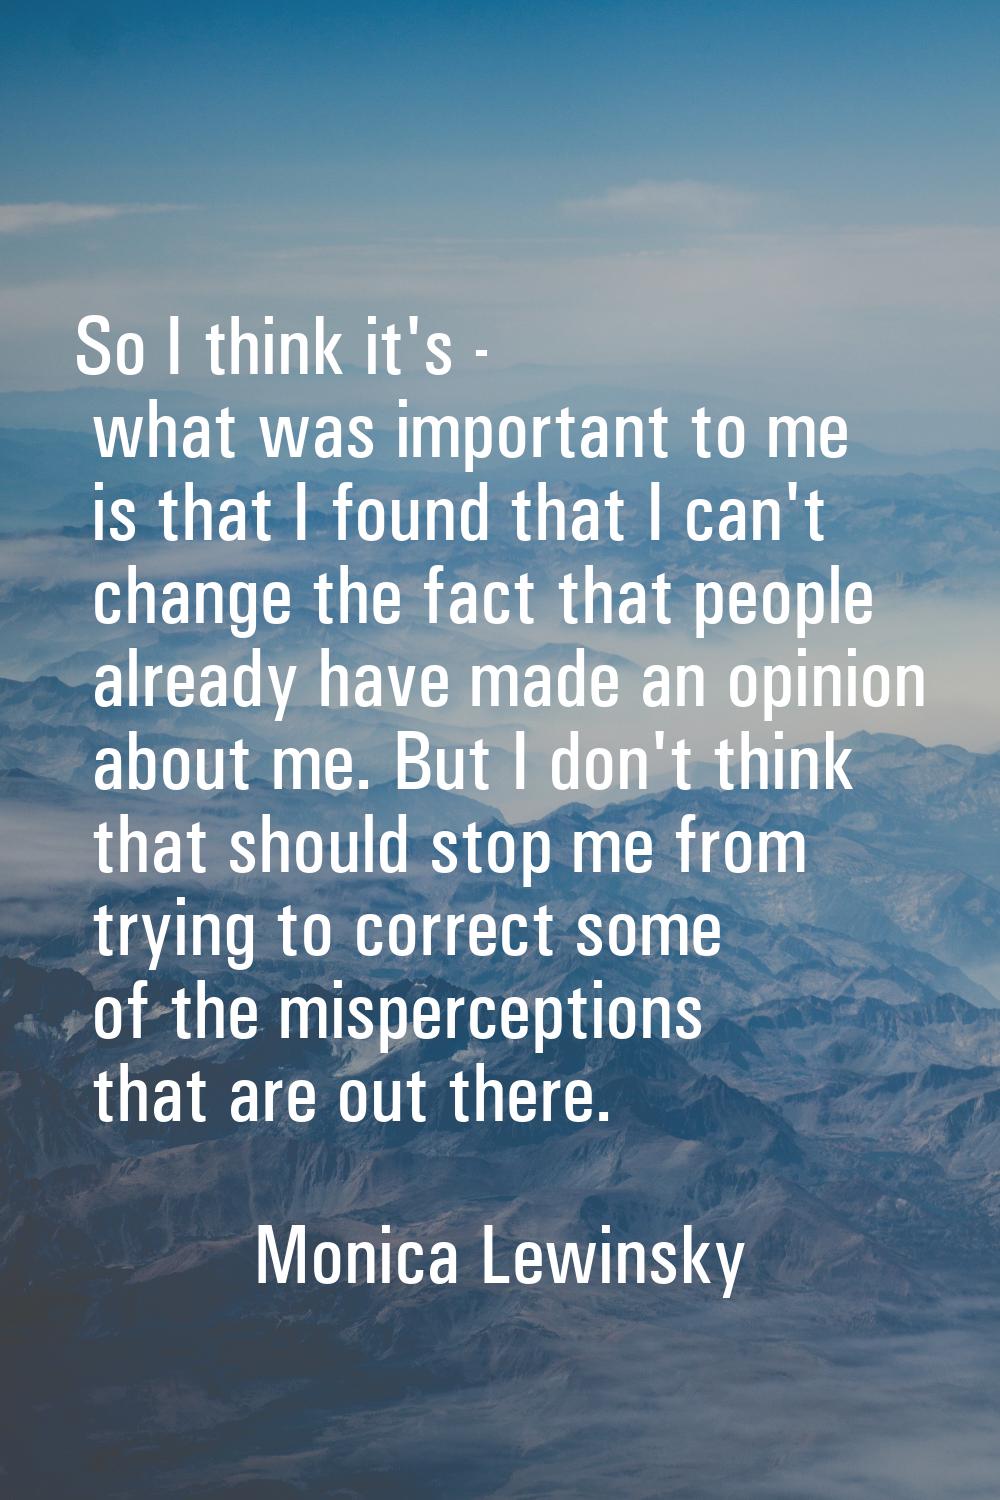 So I think it's - what was important to me is that I found that I can't change the fact that people